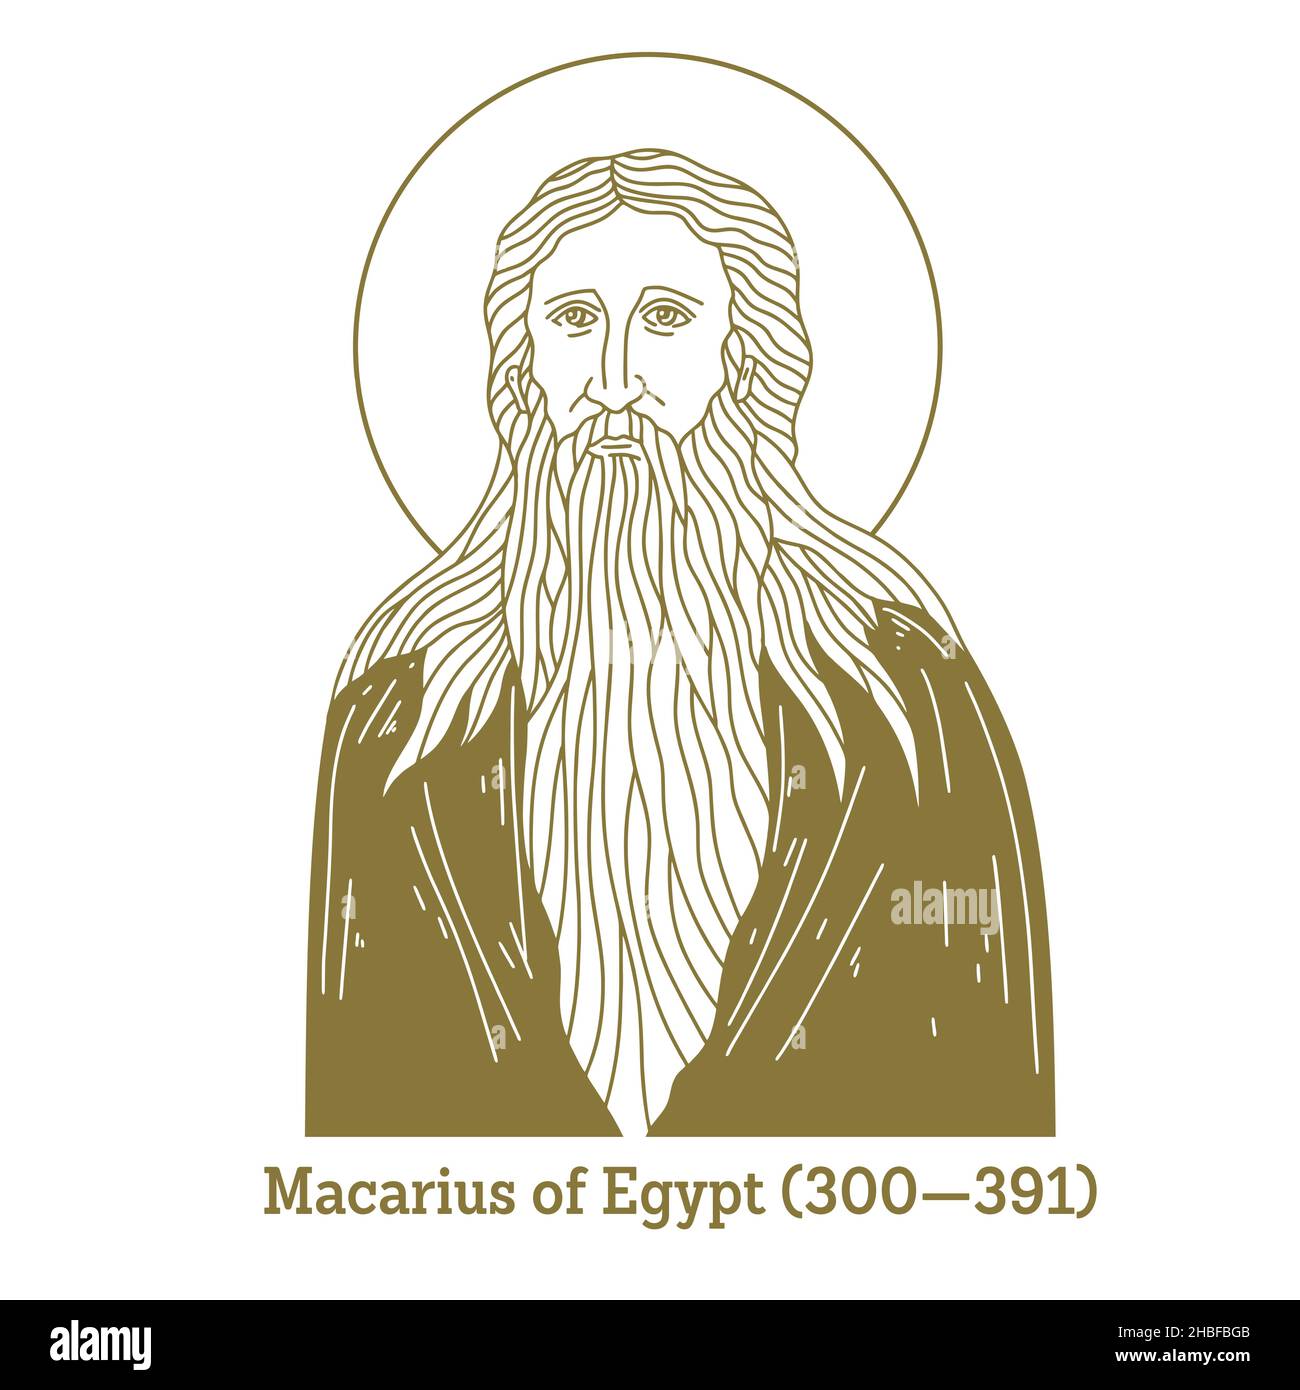 Macarius of Egypt (300-391) was a Coptic Christian monk and hermit. He is also known as Macarius the Elder or Macarius the Great. Stock Vector